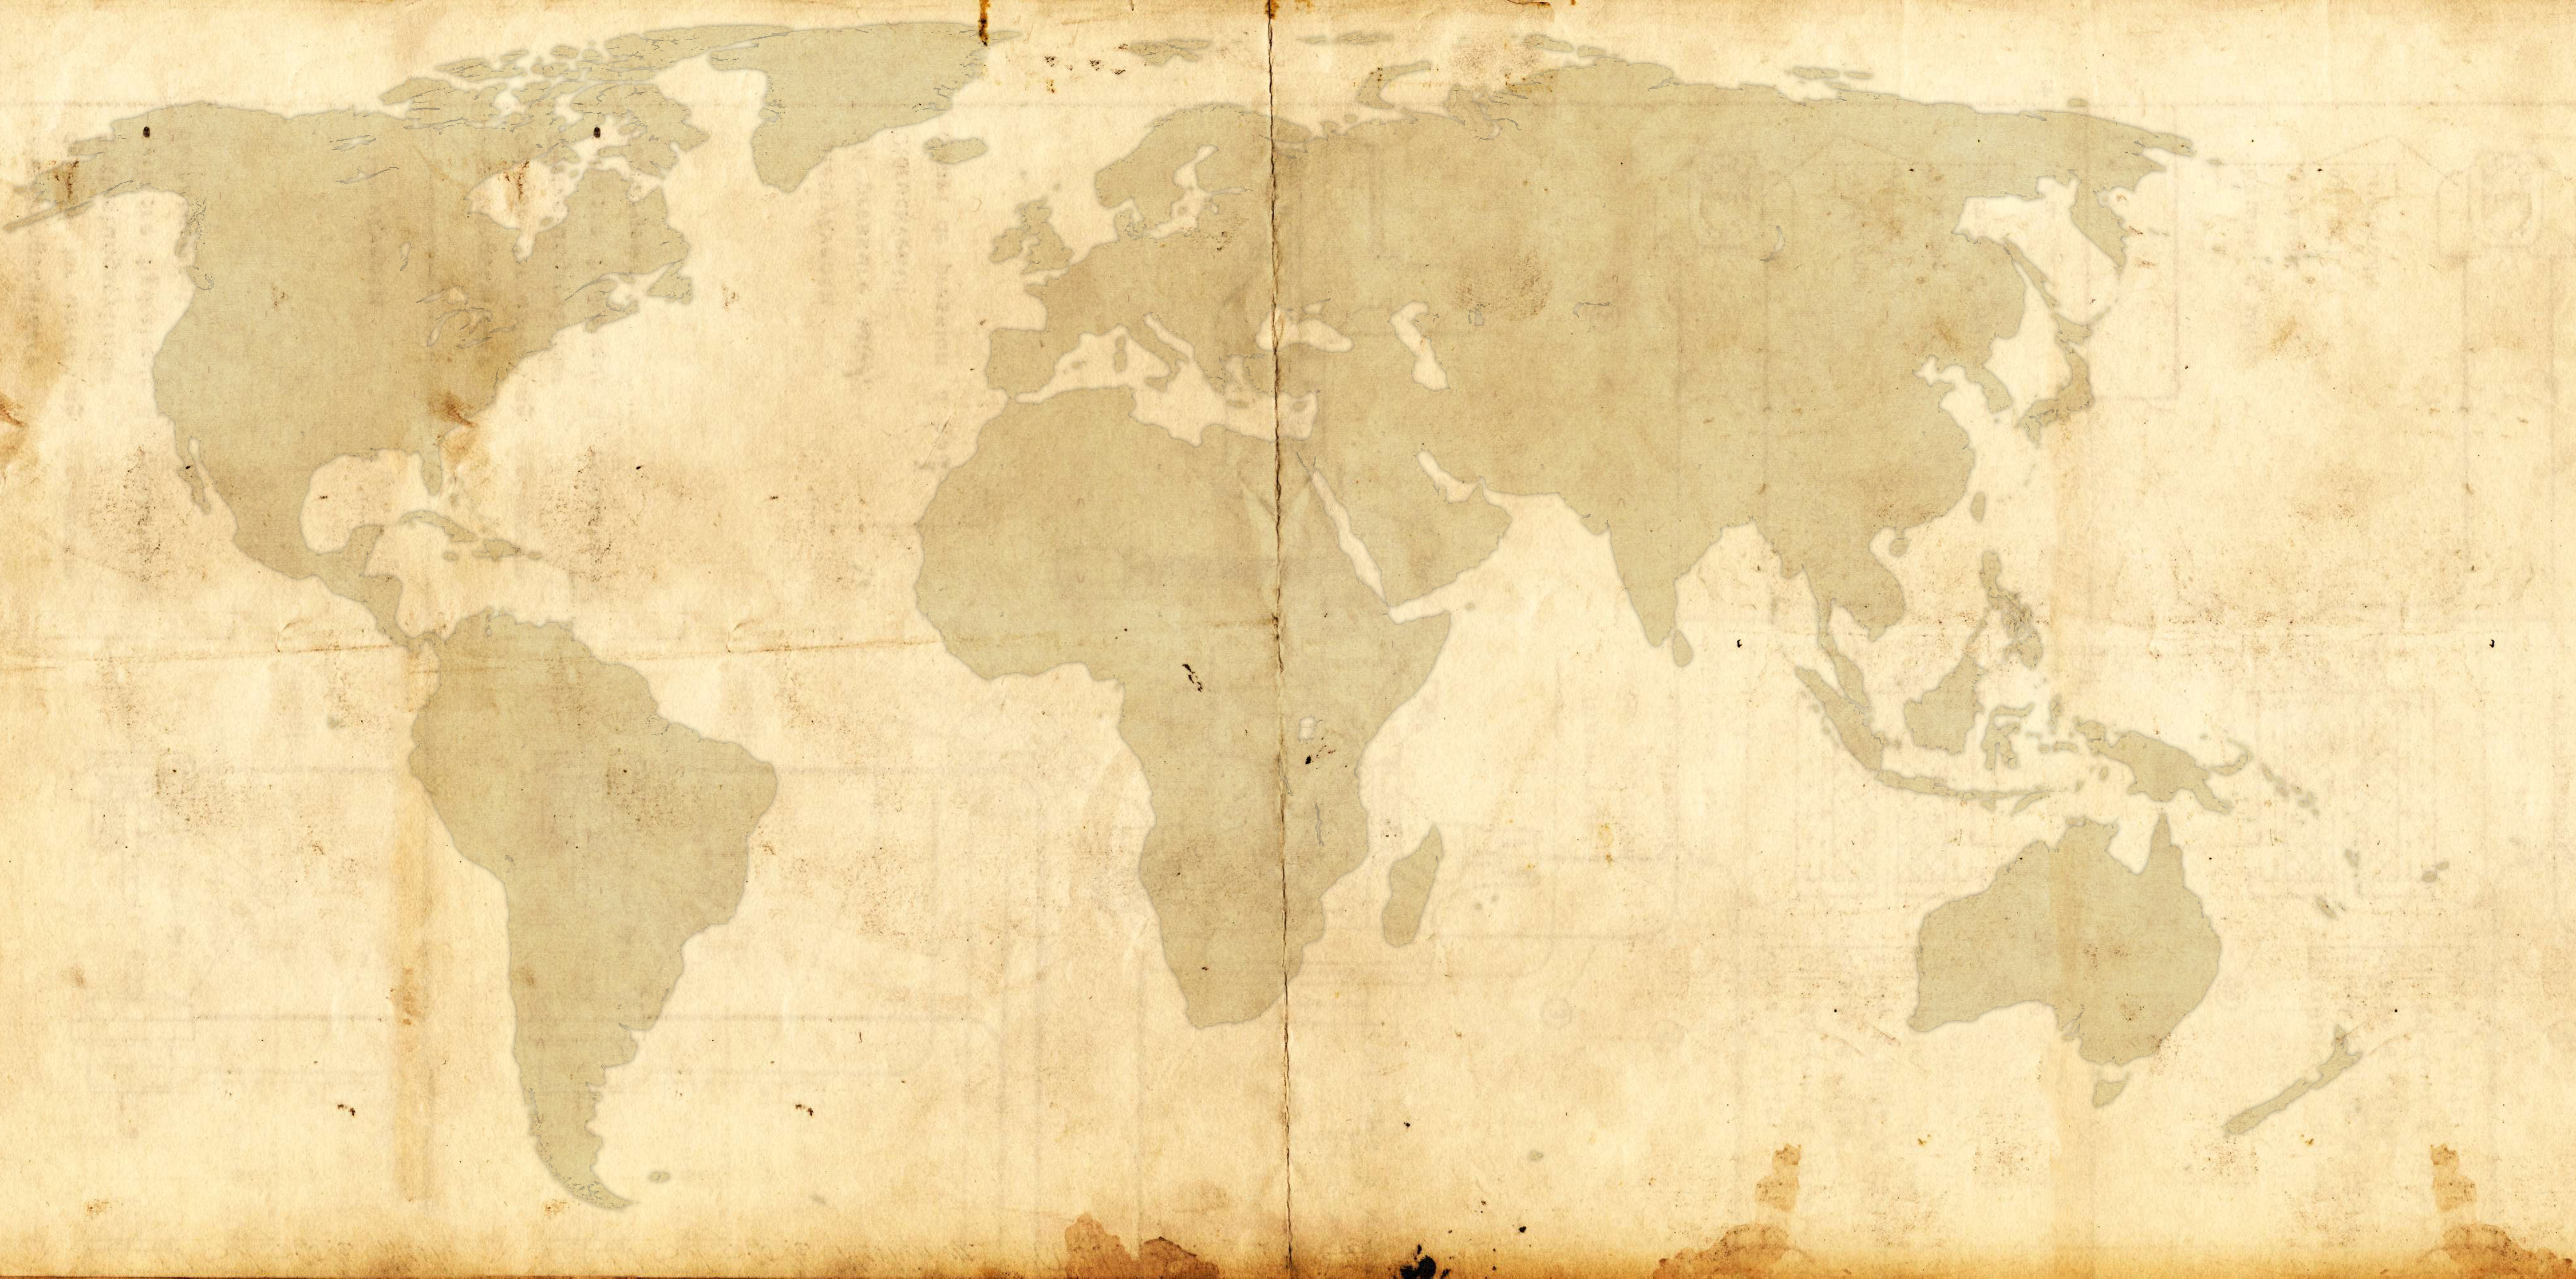 World Map Template Steampunk Victorian Style By Floppybootstomp On